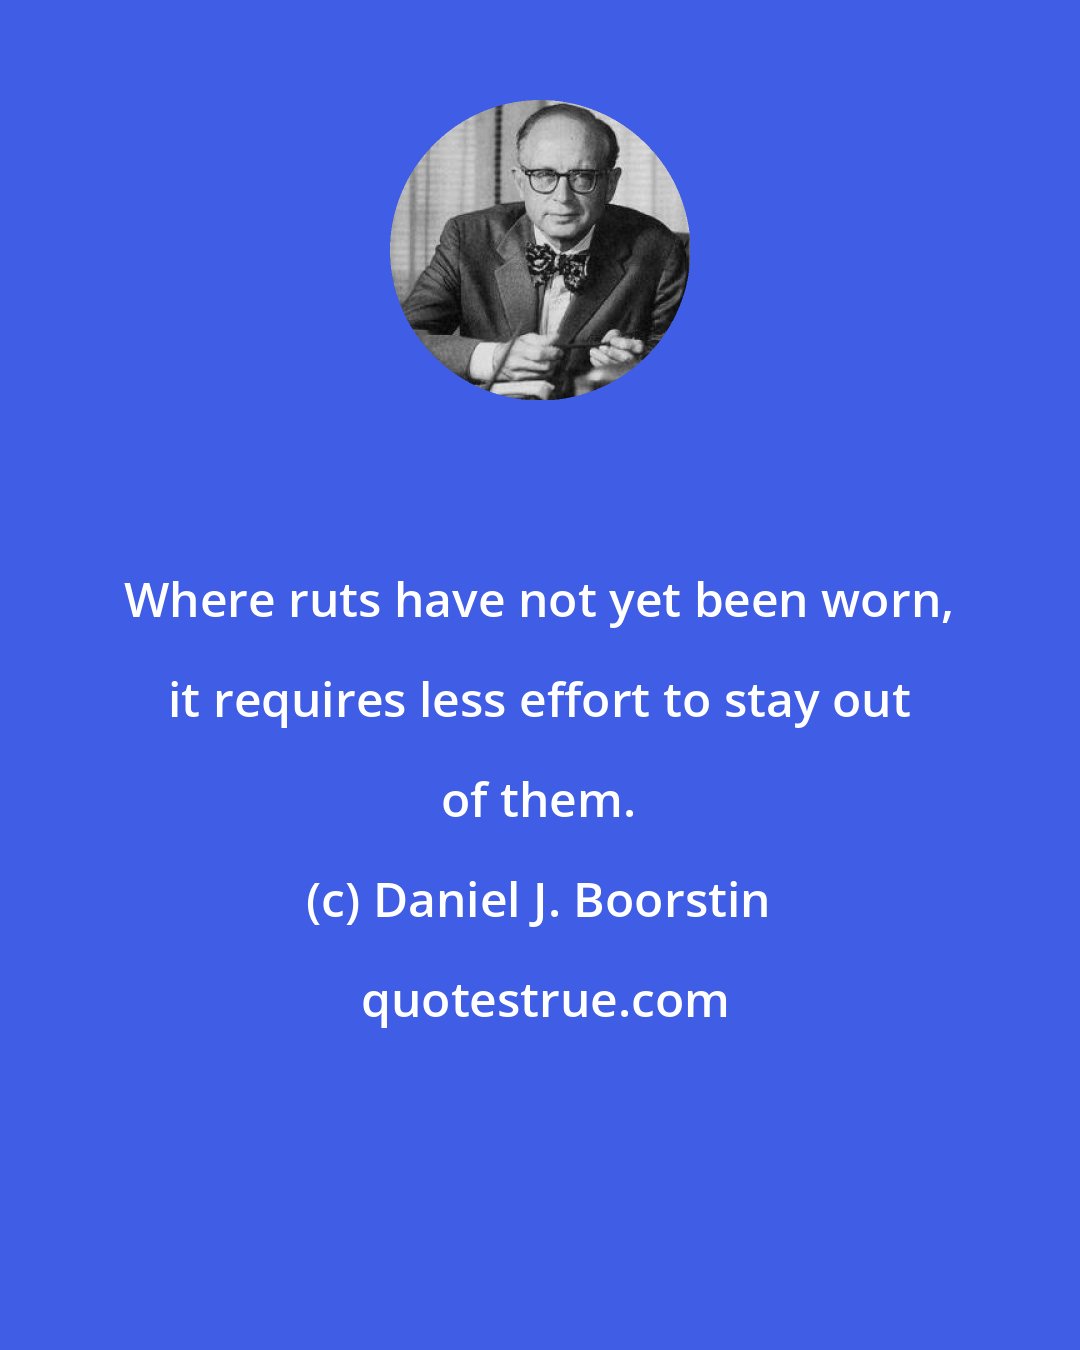 Daniel J. Boorstin: Where ruts have not yet been worn, it requires less effort to stay out of them.